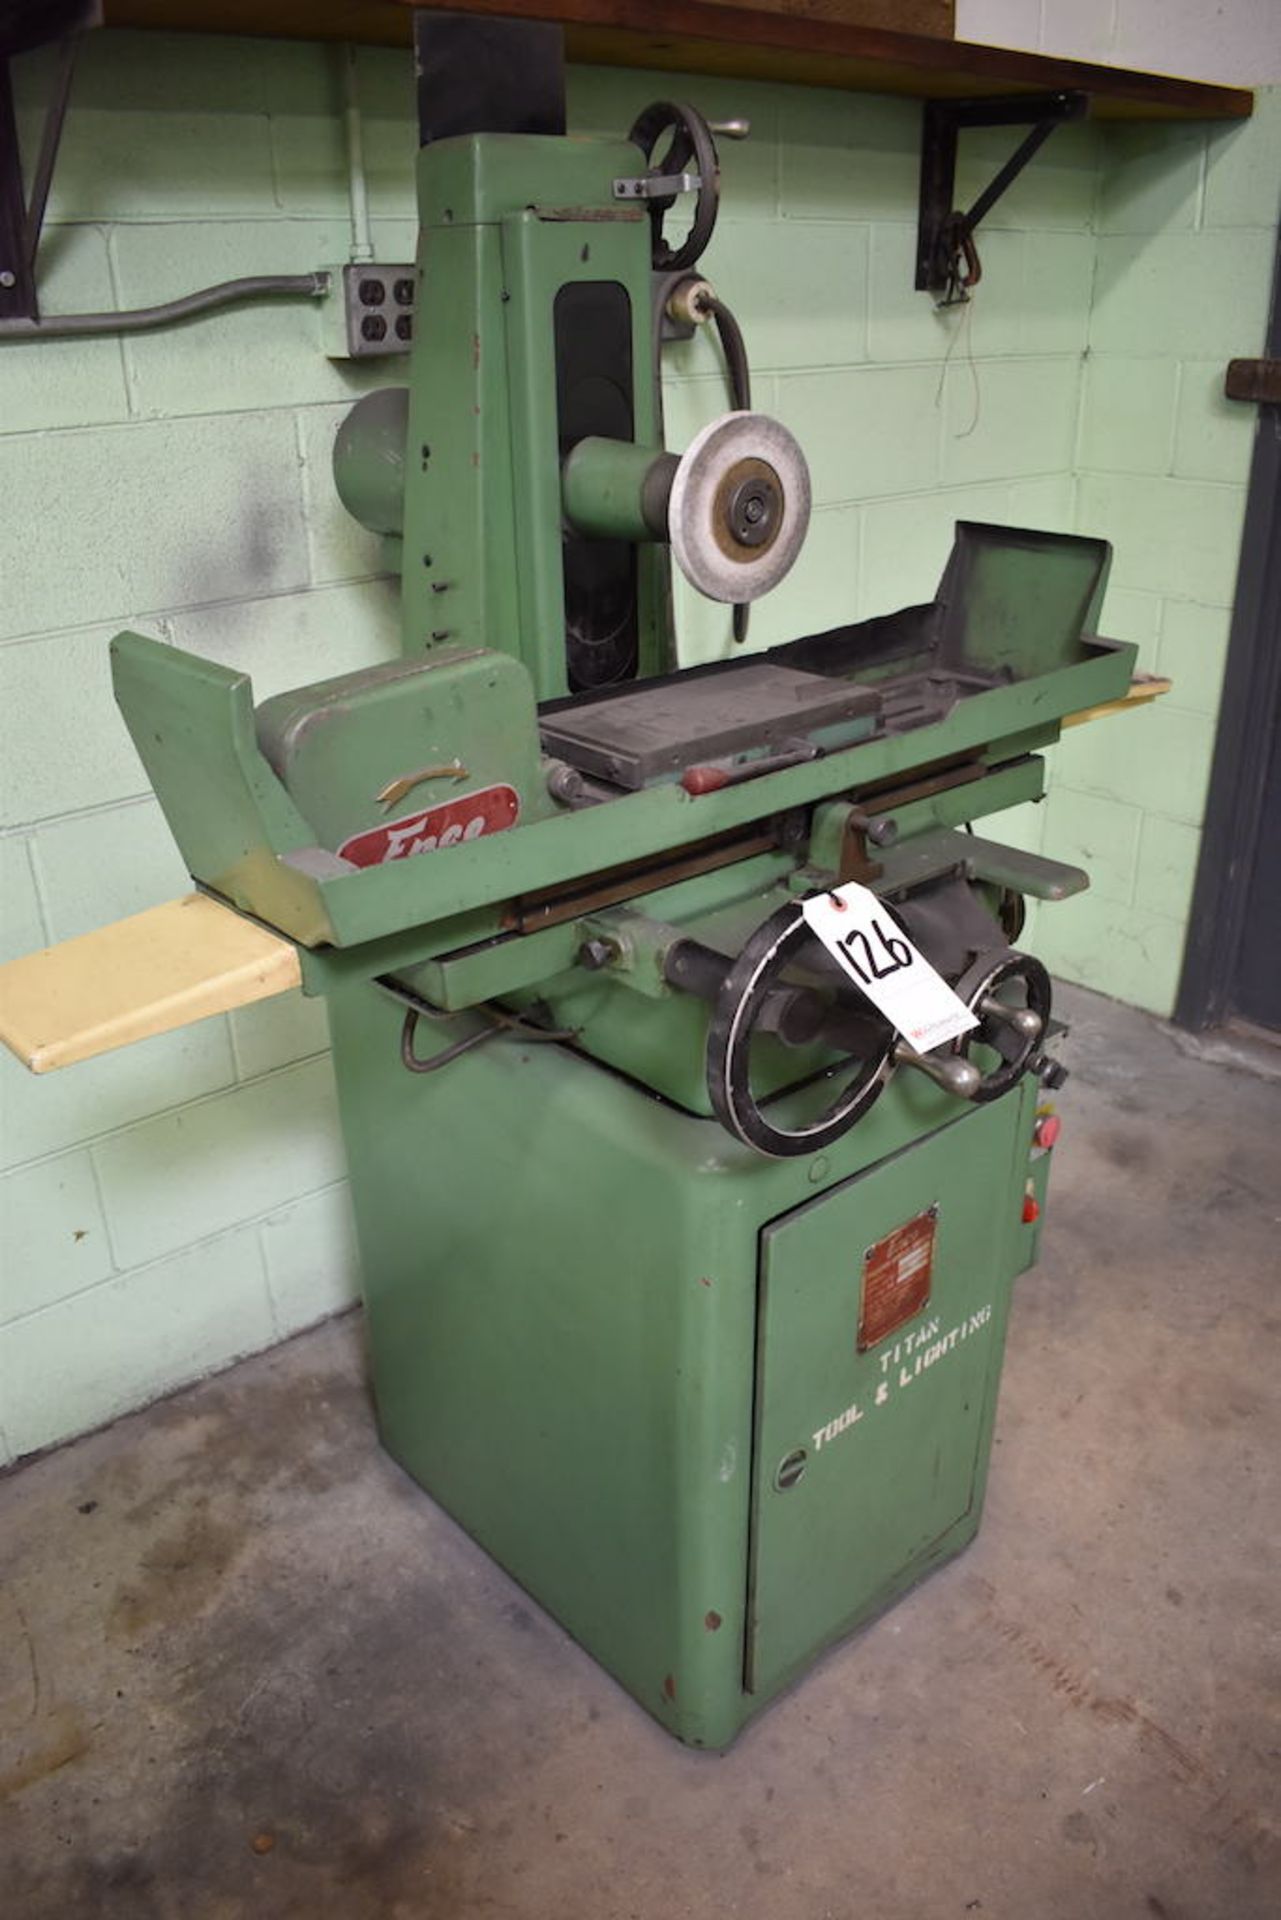 ENCO 6 X 12 HAND FEED SURFACE GRINDER - Image 2 of 4